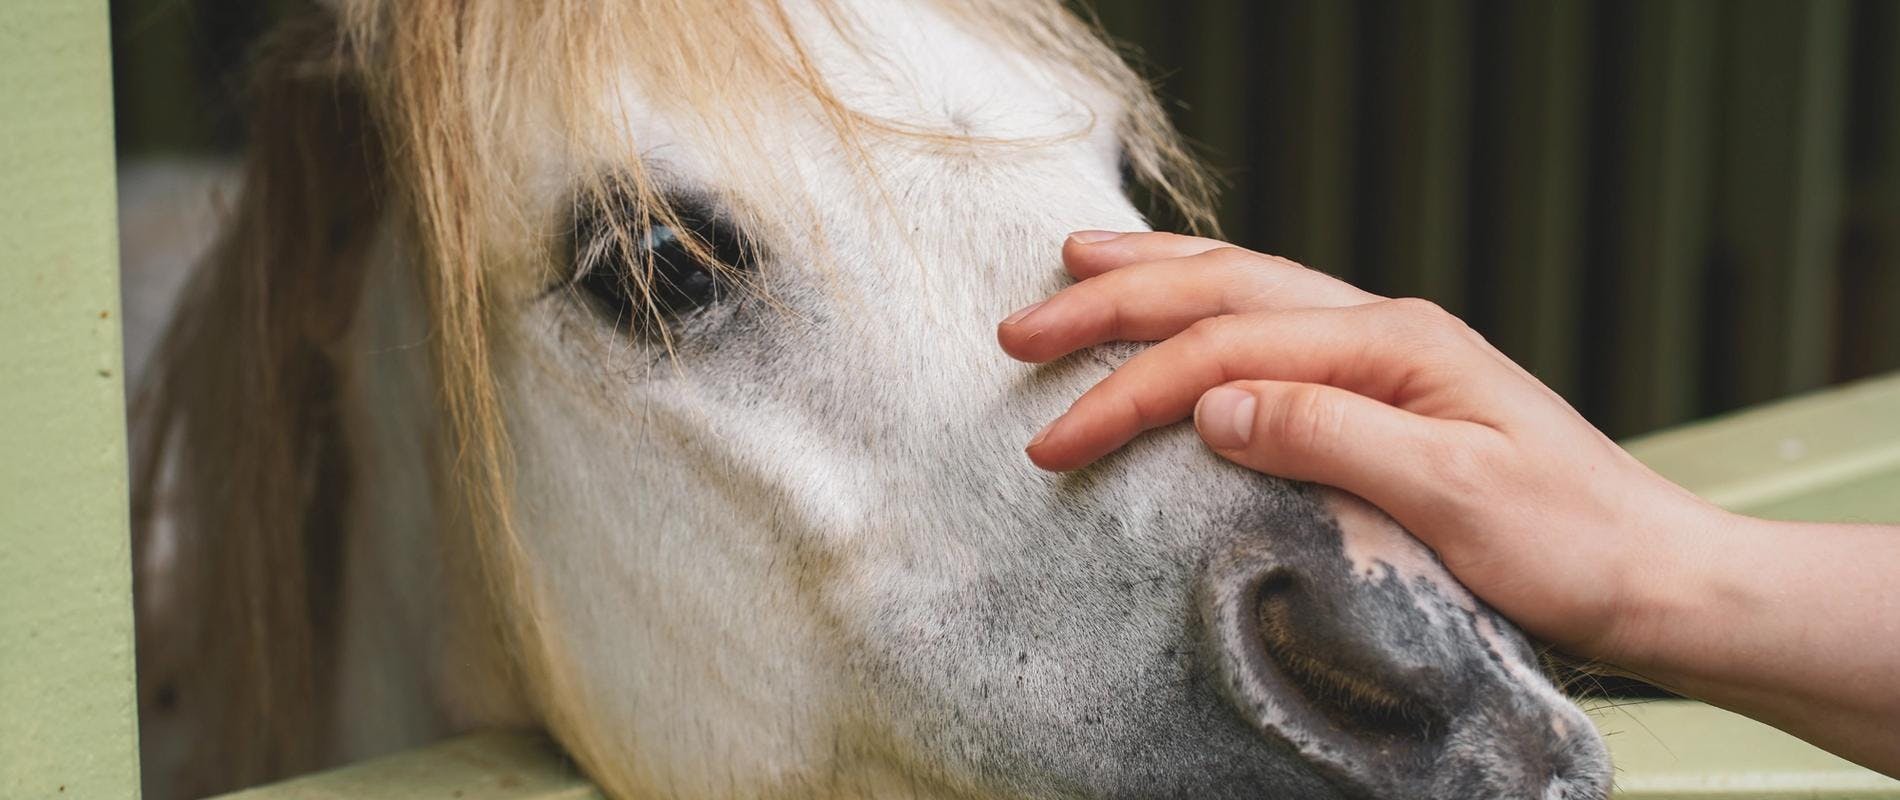 A hand on a horse's nose